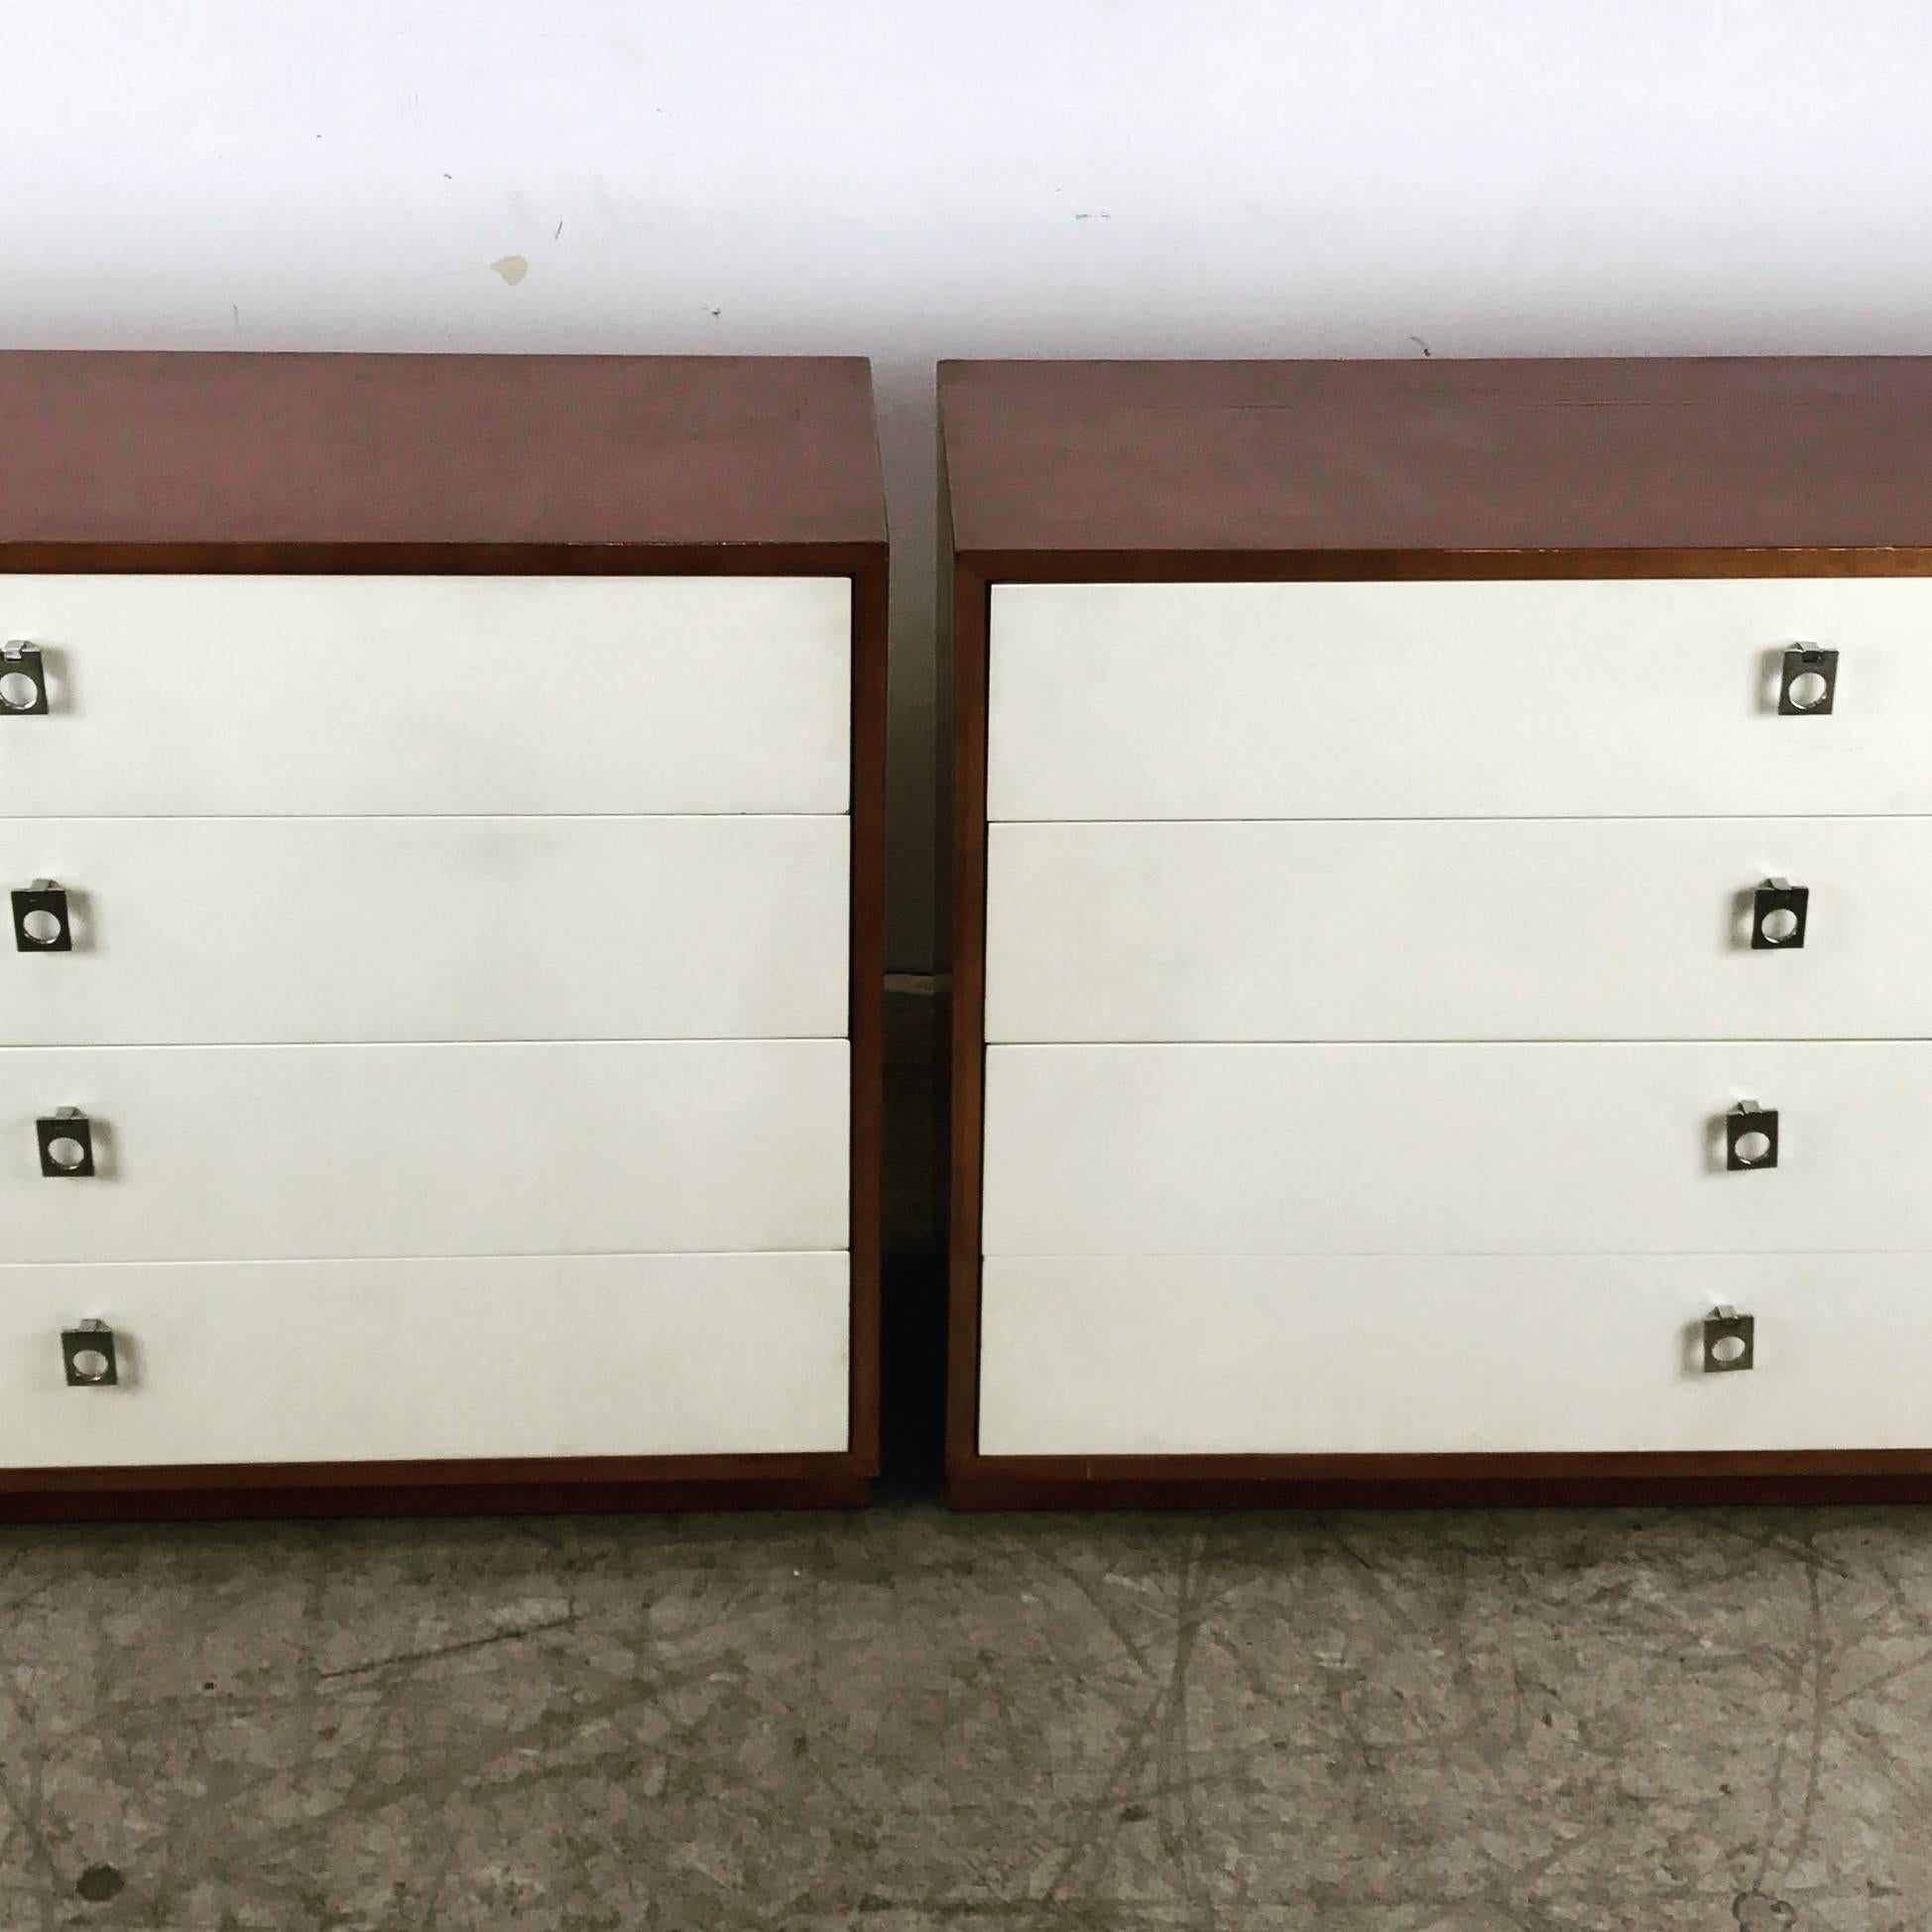 Pair of modernist chests by Jack Cartwright for founders, sleek, simple elegant design featuring four drawer walnut cabinets white lacquered fronts with stylized chrome hand pulls, hand delivery available to City or anywhere en route for Buffalo, NY.